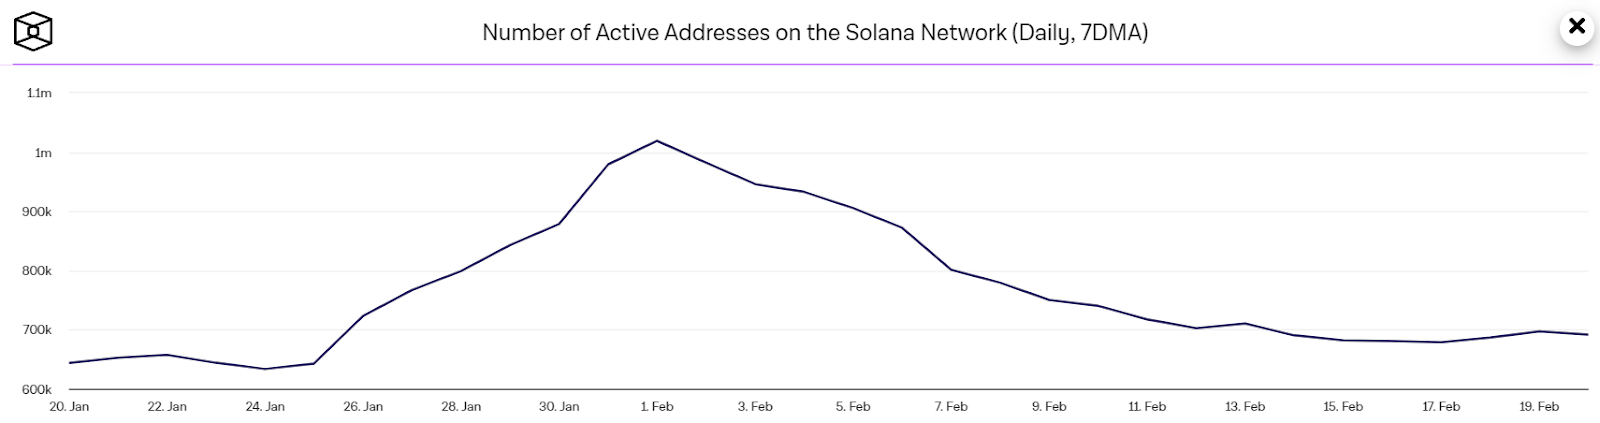 Solana Faces Decline Toward 0 As Active Addresses Plunge By 30%! Here’s Next SOL Price Level